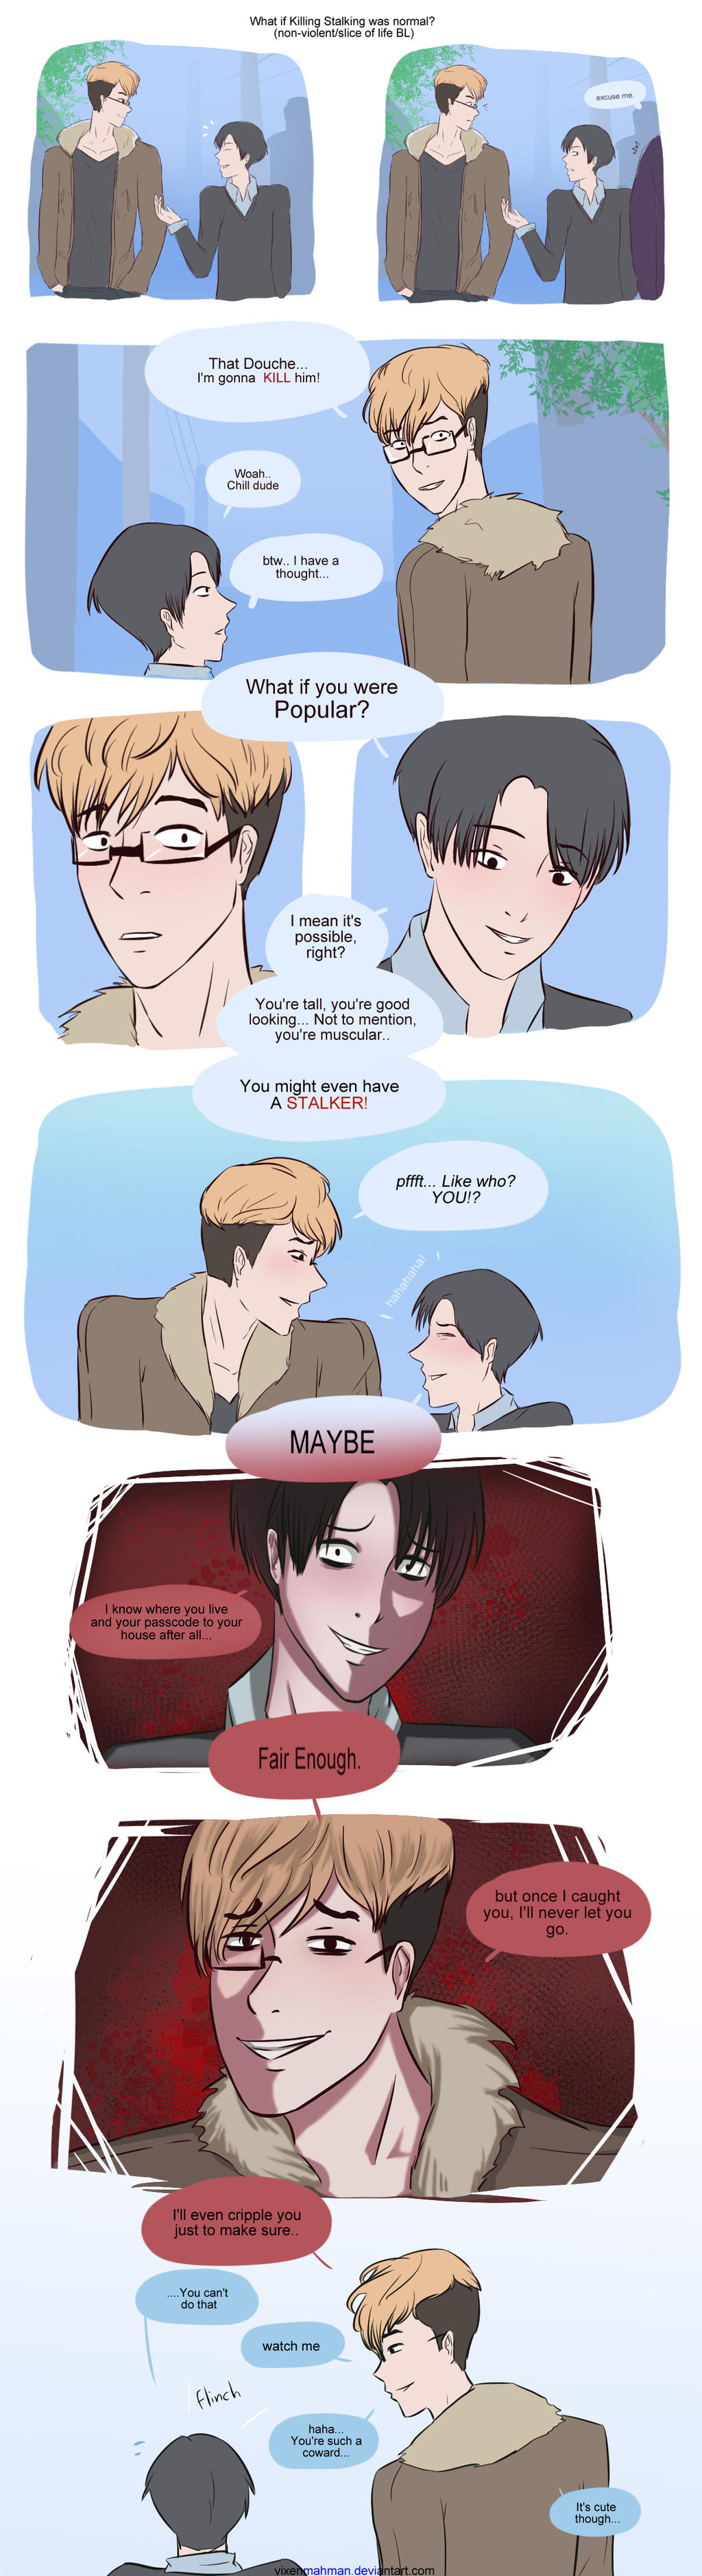 Killing Stalking- If you haven't read it and plan to don't look at